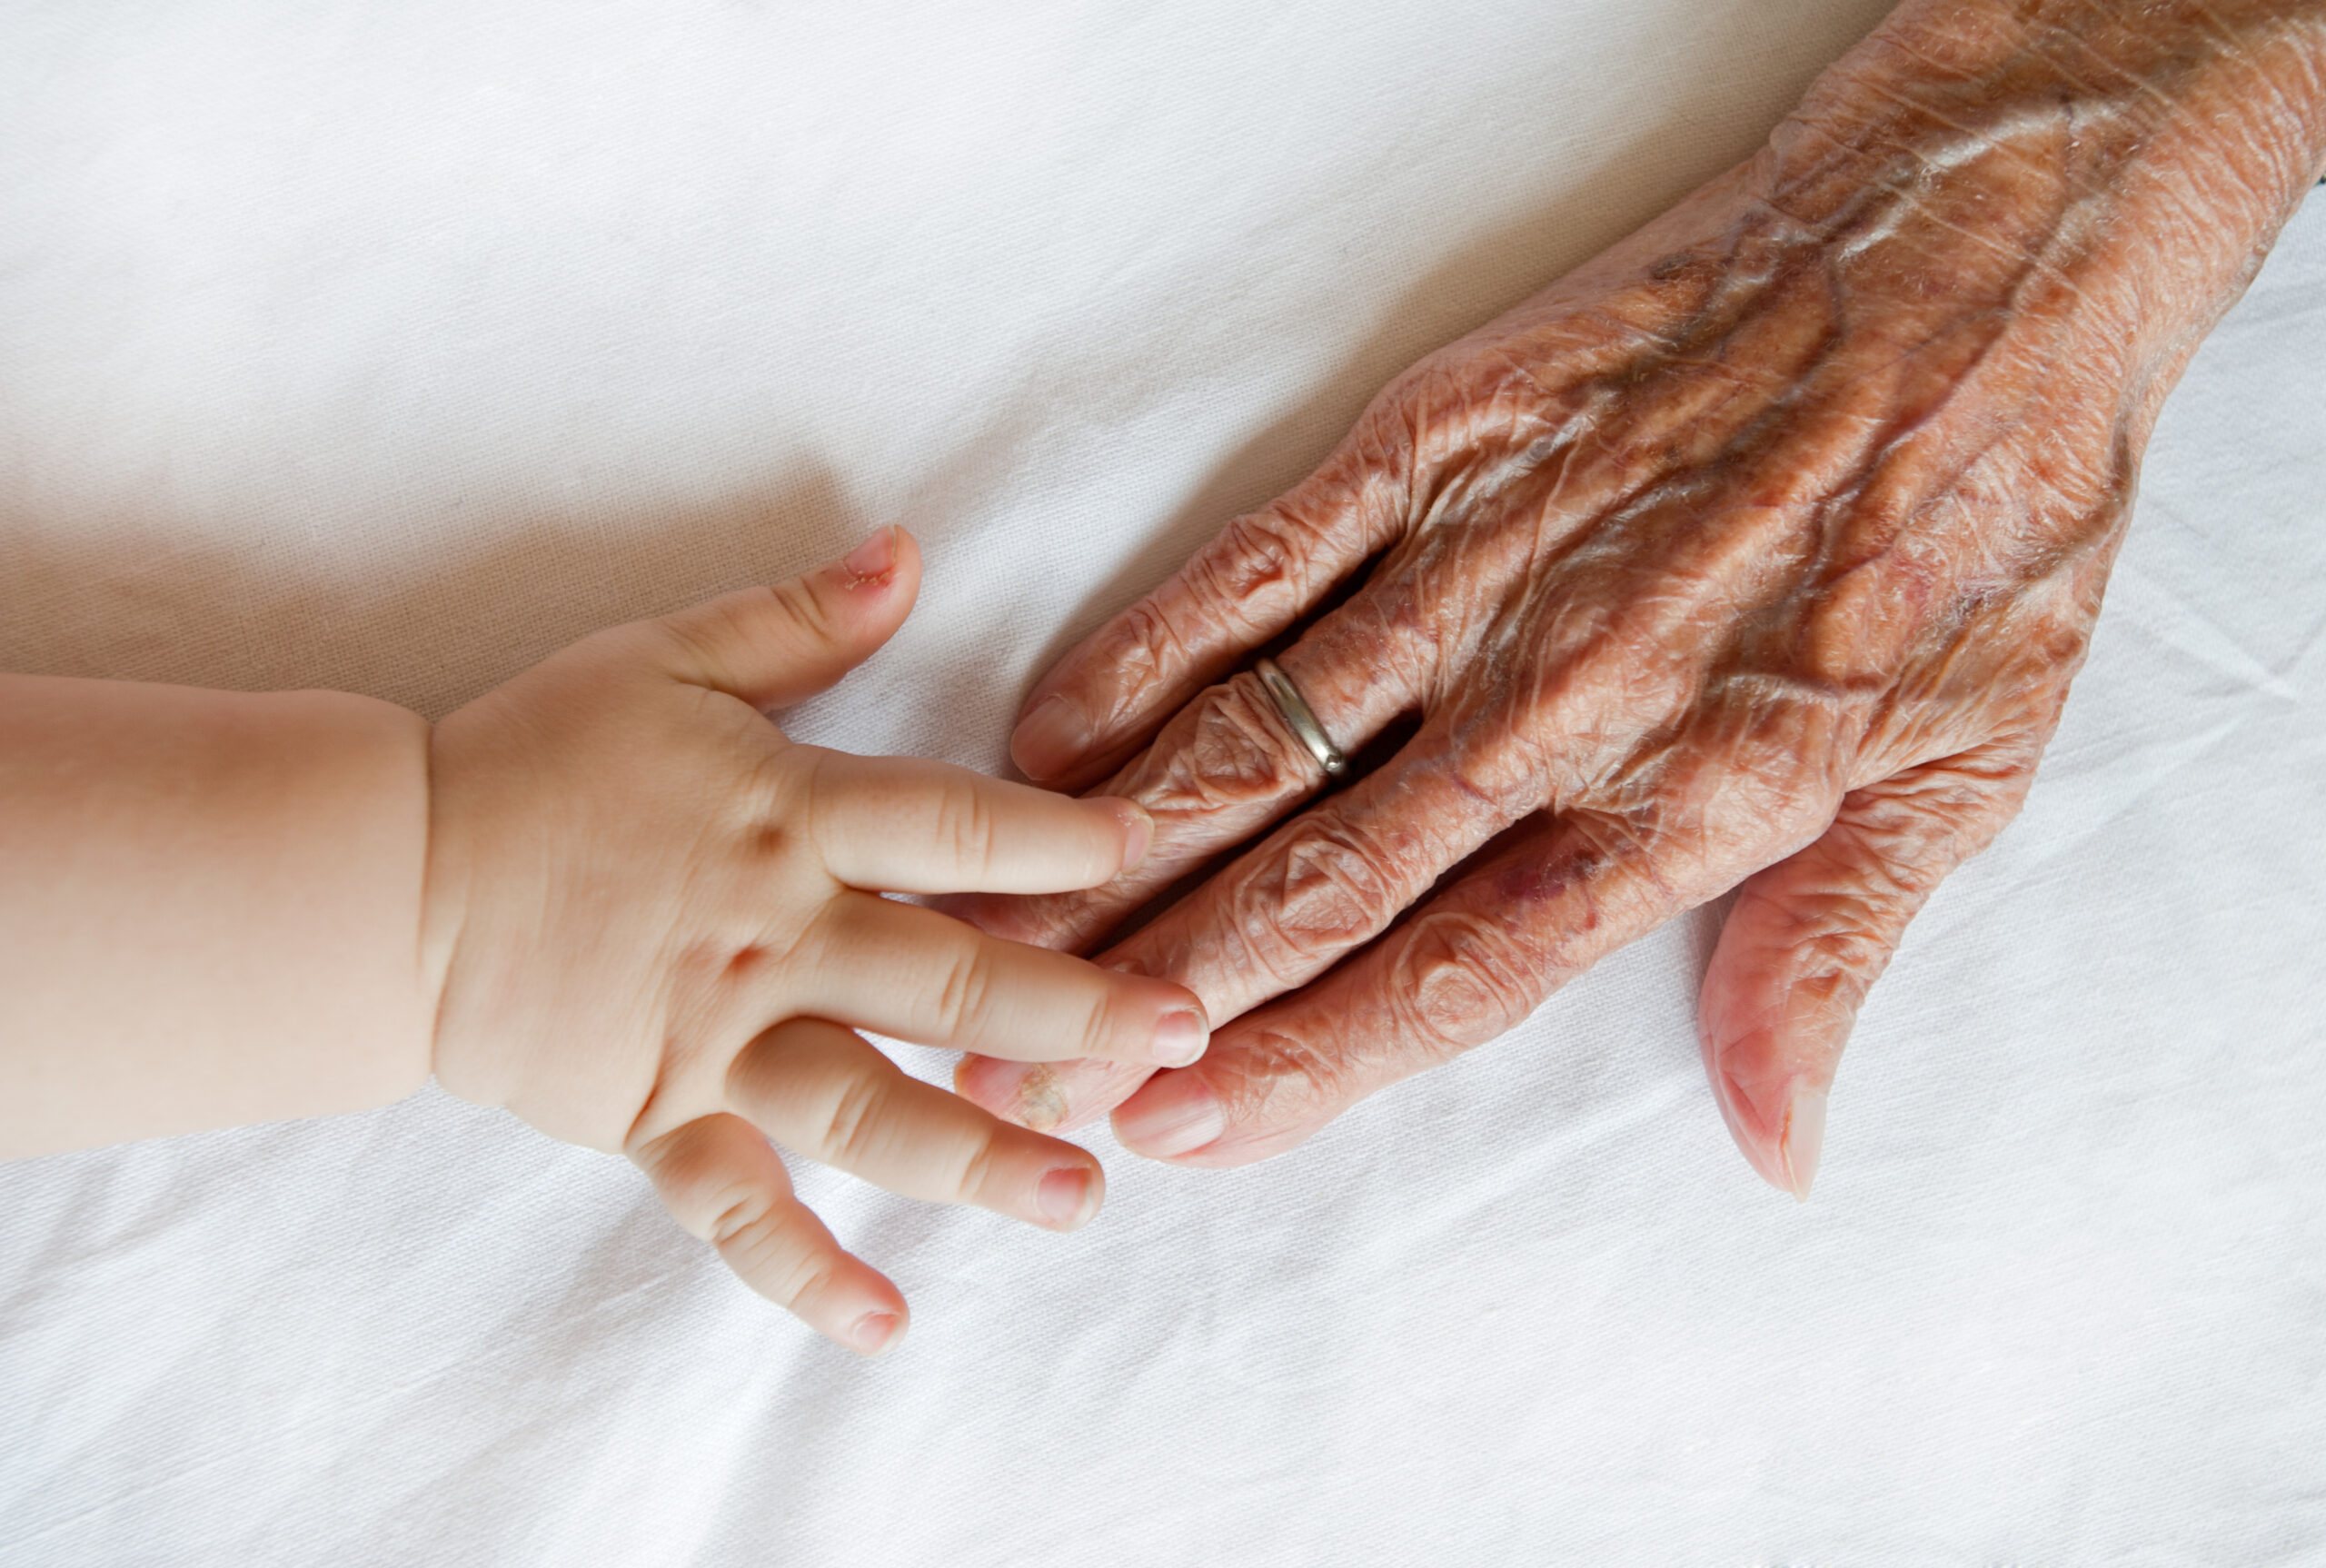 Photo of a grandparent and child's hands